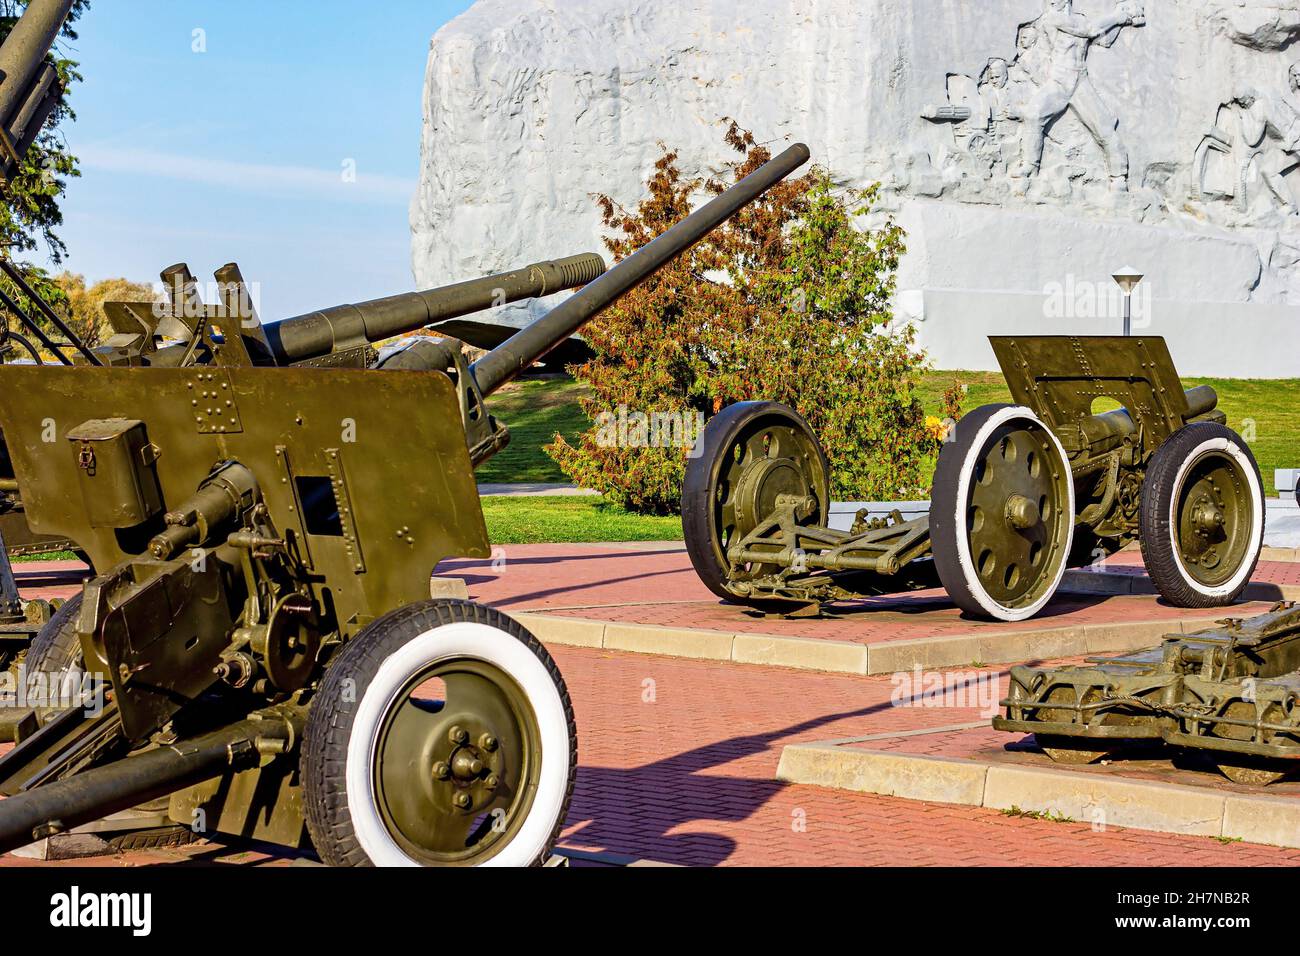 BREST, BELARUS - OCTOBER 18, 2019: Historical artillery gun on the wheels from the World War II age. Close up of a retro military cannon weapon. Stock Photo